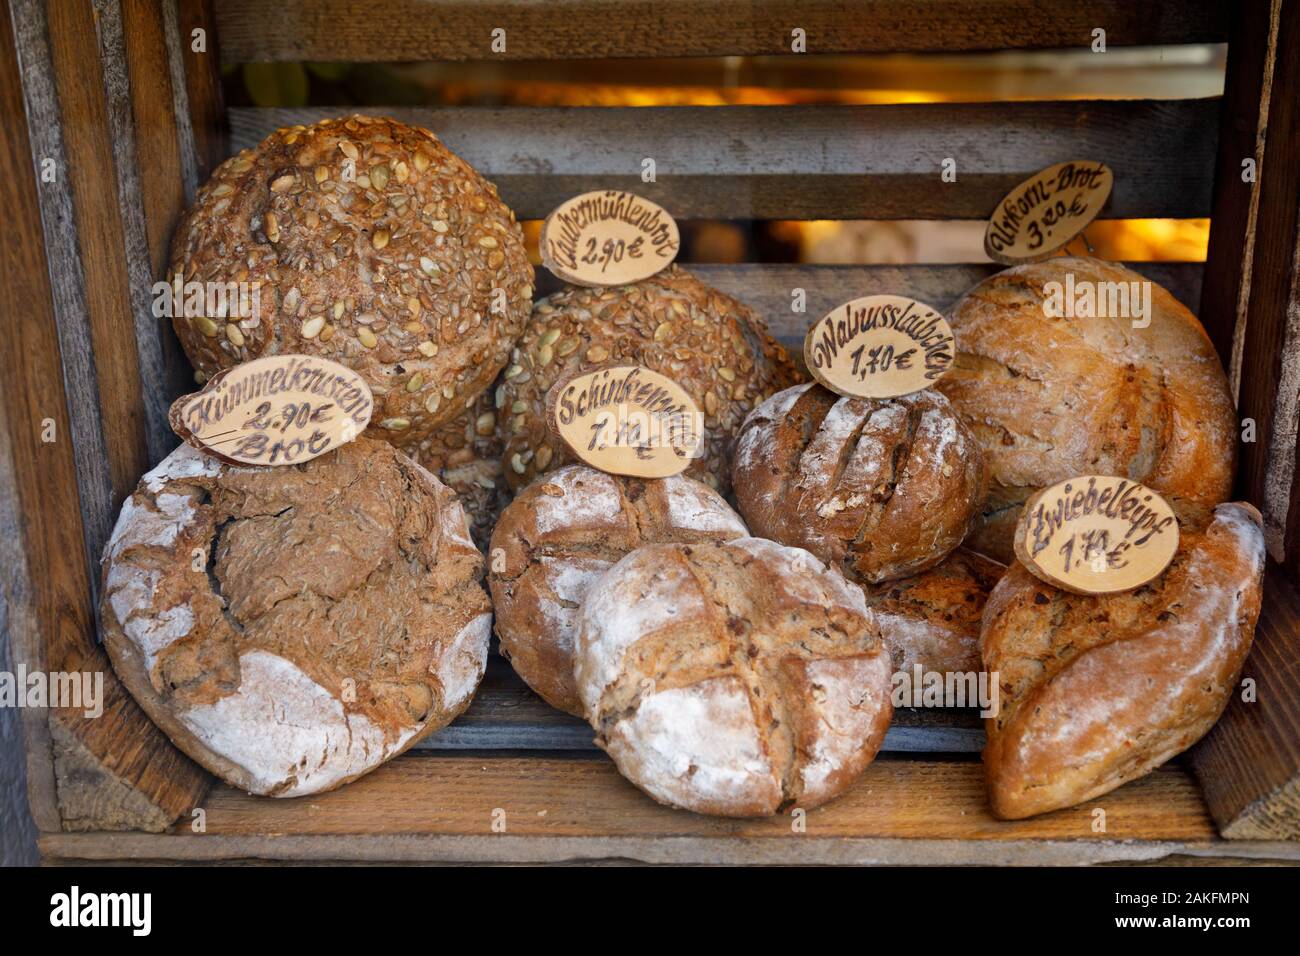 Freshly baked traditional German  bread loafs for sale at market in Rothenburg ob der Tauber, Bavaria, Germany, Europe Stock Photo